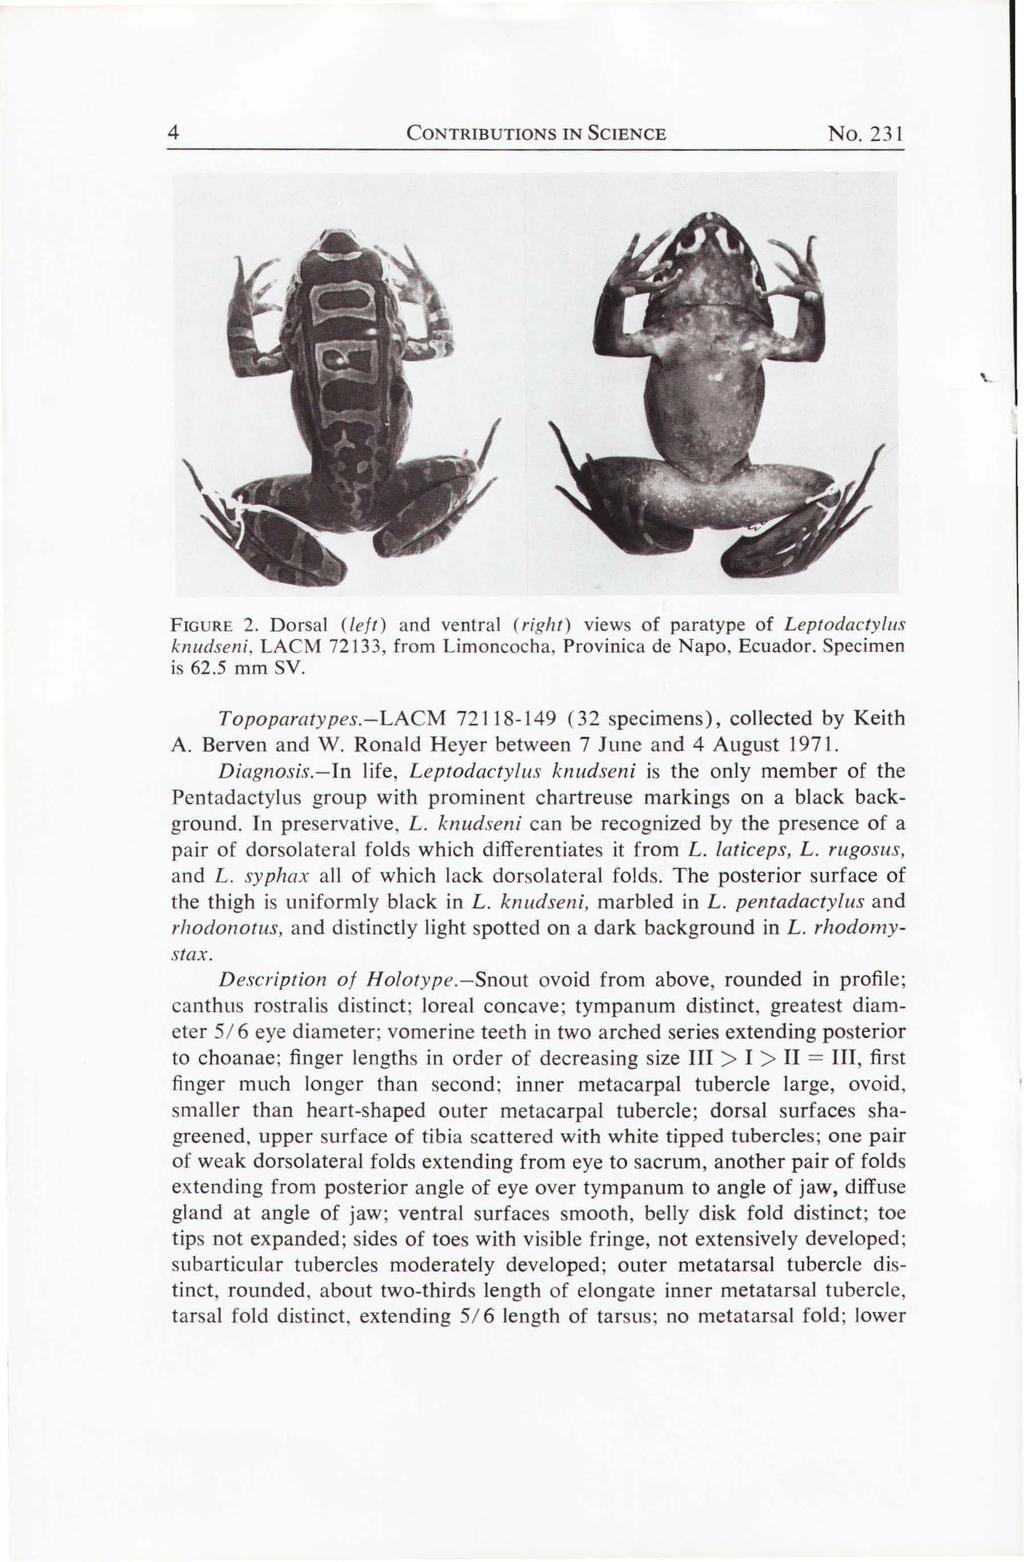 4 CONTRIBUTIONS IN SCIENCE No. 231 FIGURE 2. Dorsal (left) and ventral (right) views of paratype of Leptodacty/us knudseni, LACM 72133, from Limoncocha, Provinica de Napo, Ecuador. Specimen is 62.